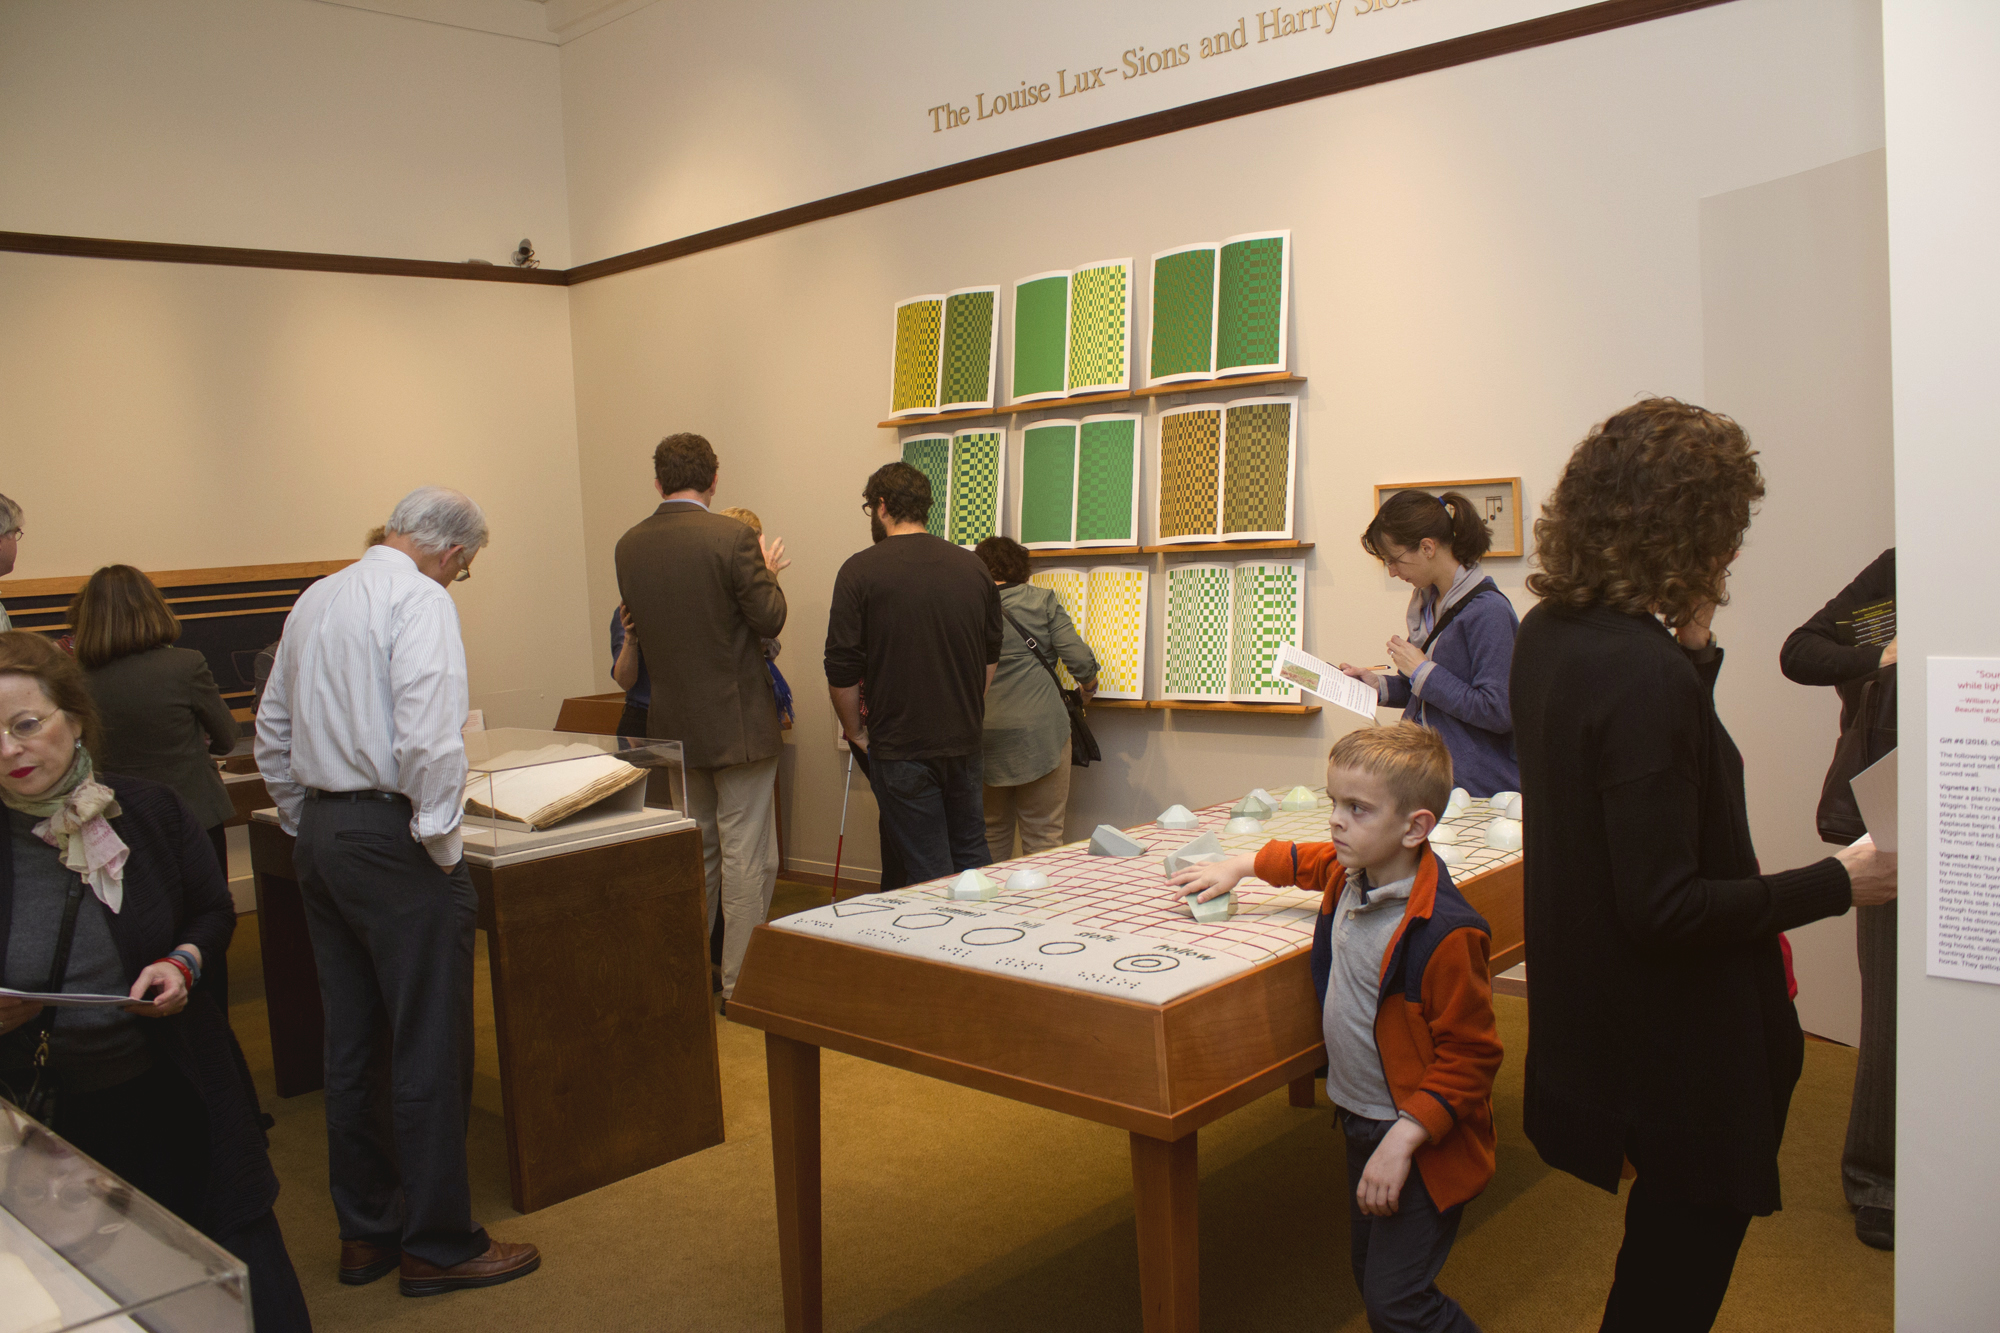 Picture shows several visitors, including a young boy, touching and viewing the installations in the center and east wall of the gallery. In the far left is a large book under a clear, mylar hood in a display case. In the left is Jayne’s Gift #5, a map representation of the travels the 19th–century blind surveyor John Metcalf. It is a vertically-positioned, large rectangular table composed of a linen top and a light brown wood base. A multi-color grid, outlines of geometric shapes, and green porcelain geometric shapes adorn the linen top. In the center background, on the back wall painted off-white, is Jayne’s Gift #4, a visual transmutation after the musical work of blind African American musician Thomas Wiggins. It is three horizontal and three vertical rows of prints in a geometric interplay of greens, browns and yellows. [end of description]